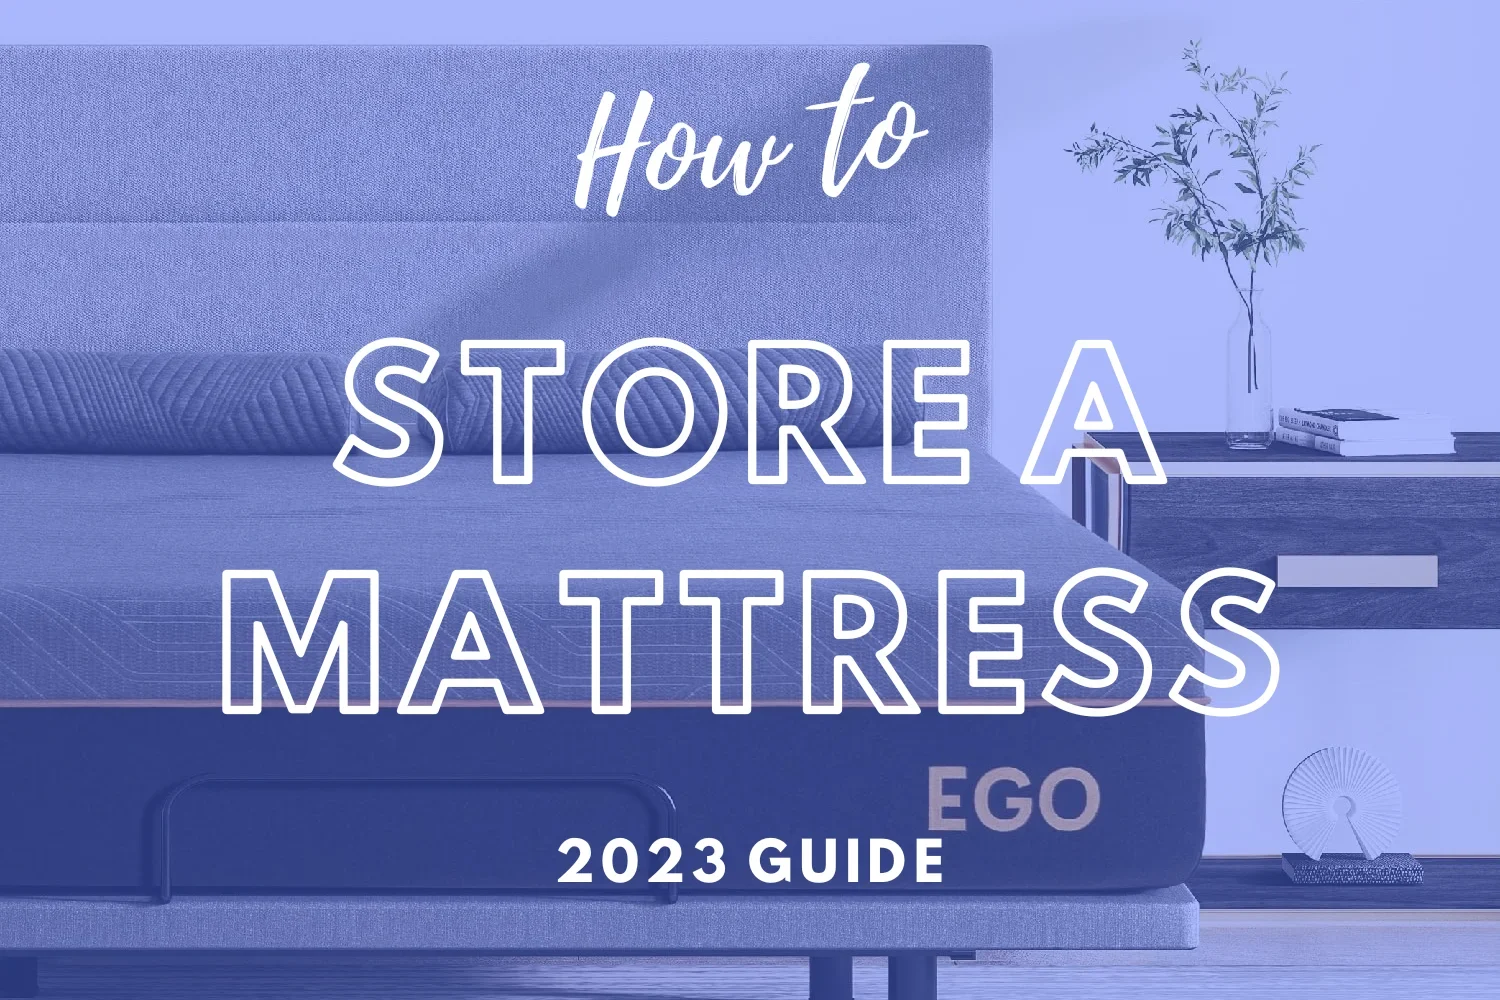 How To Store A Mattress 2023 Guide.webp